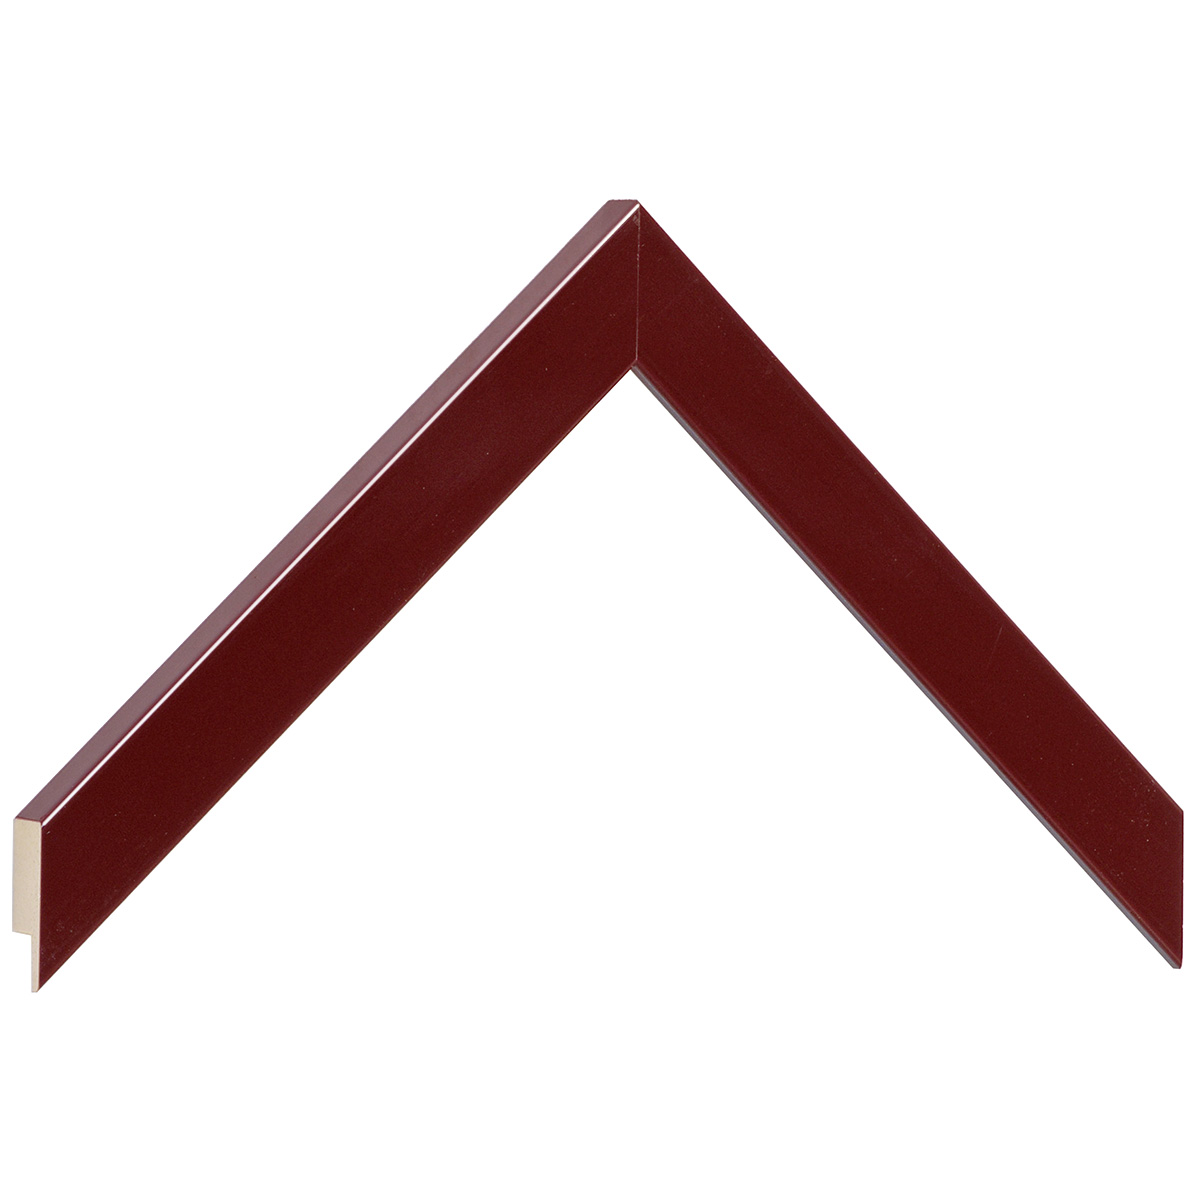 Moulding ayous - width 20mm height 14 - Glossy burgundy - Sample